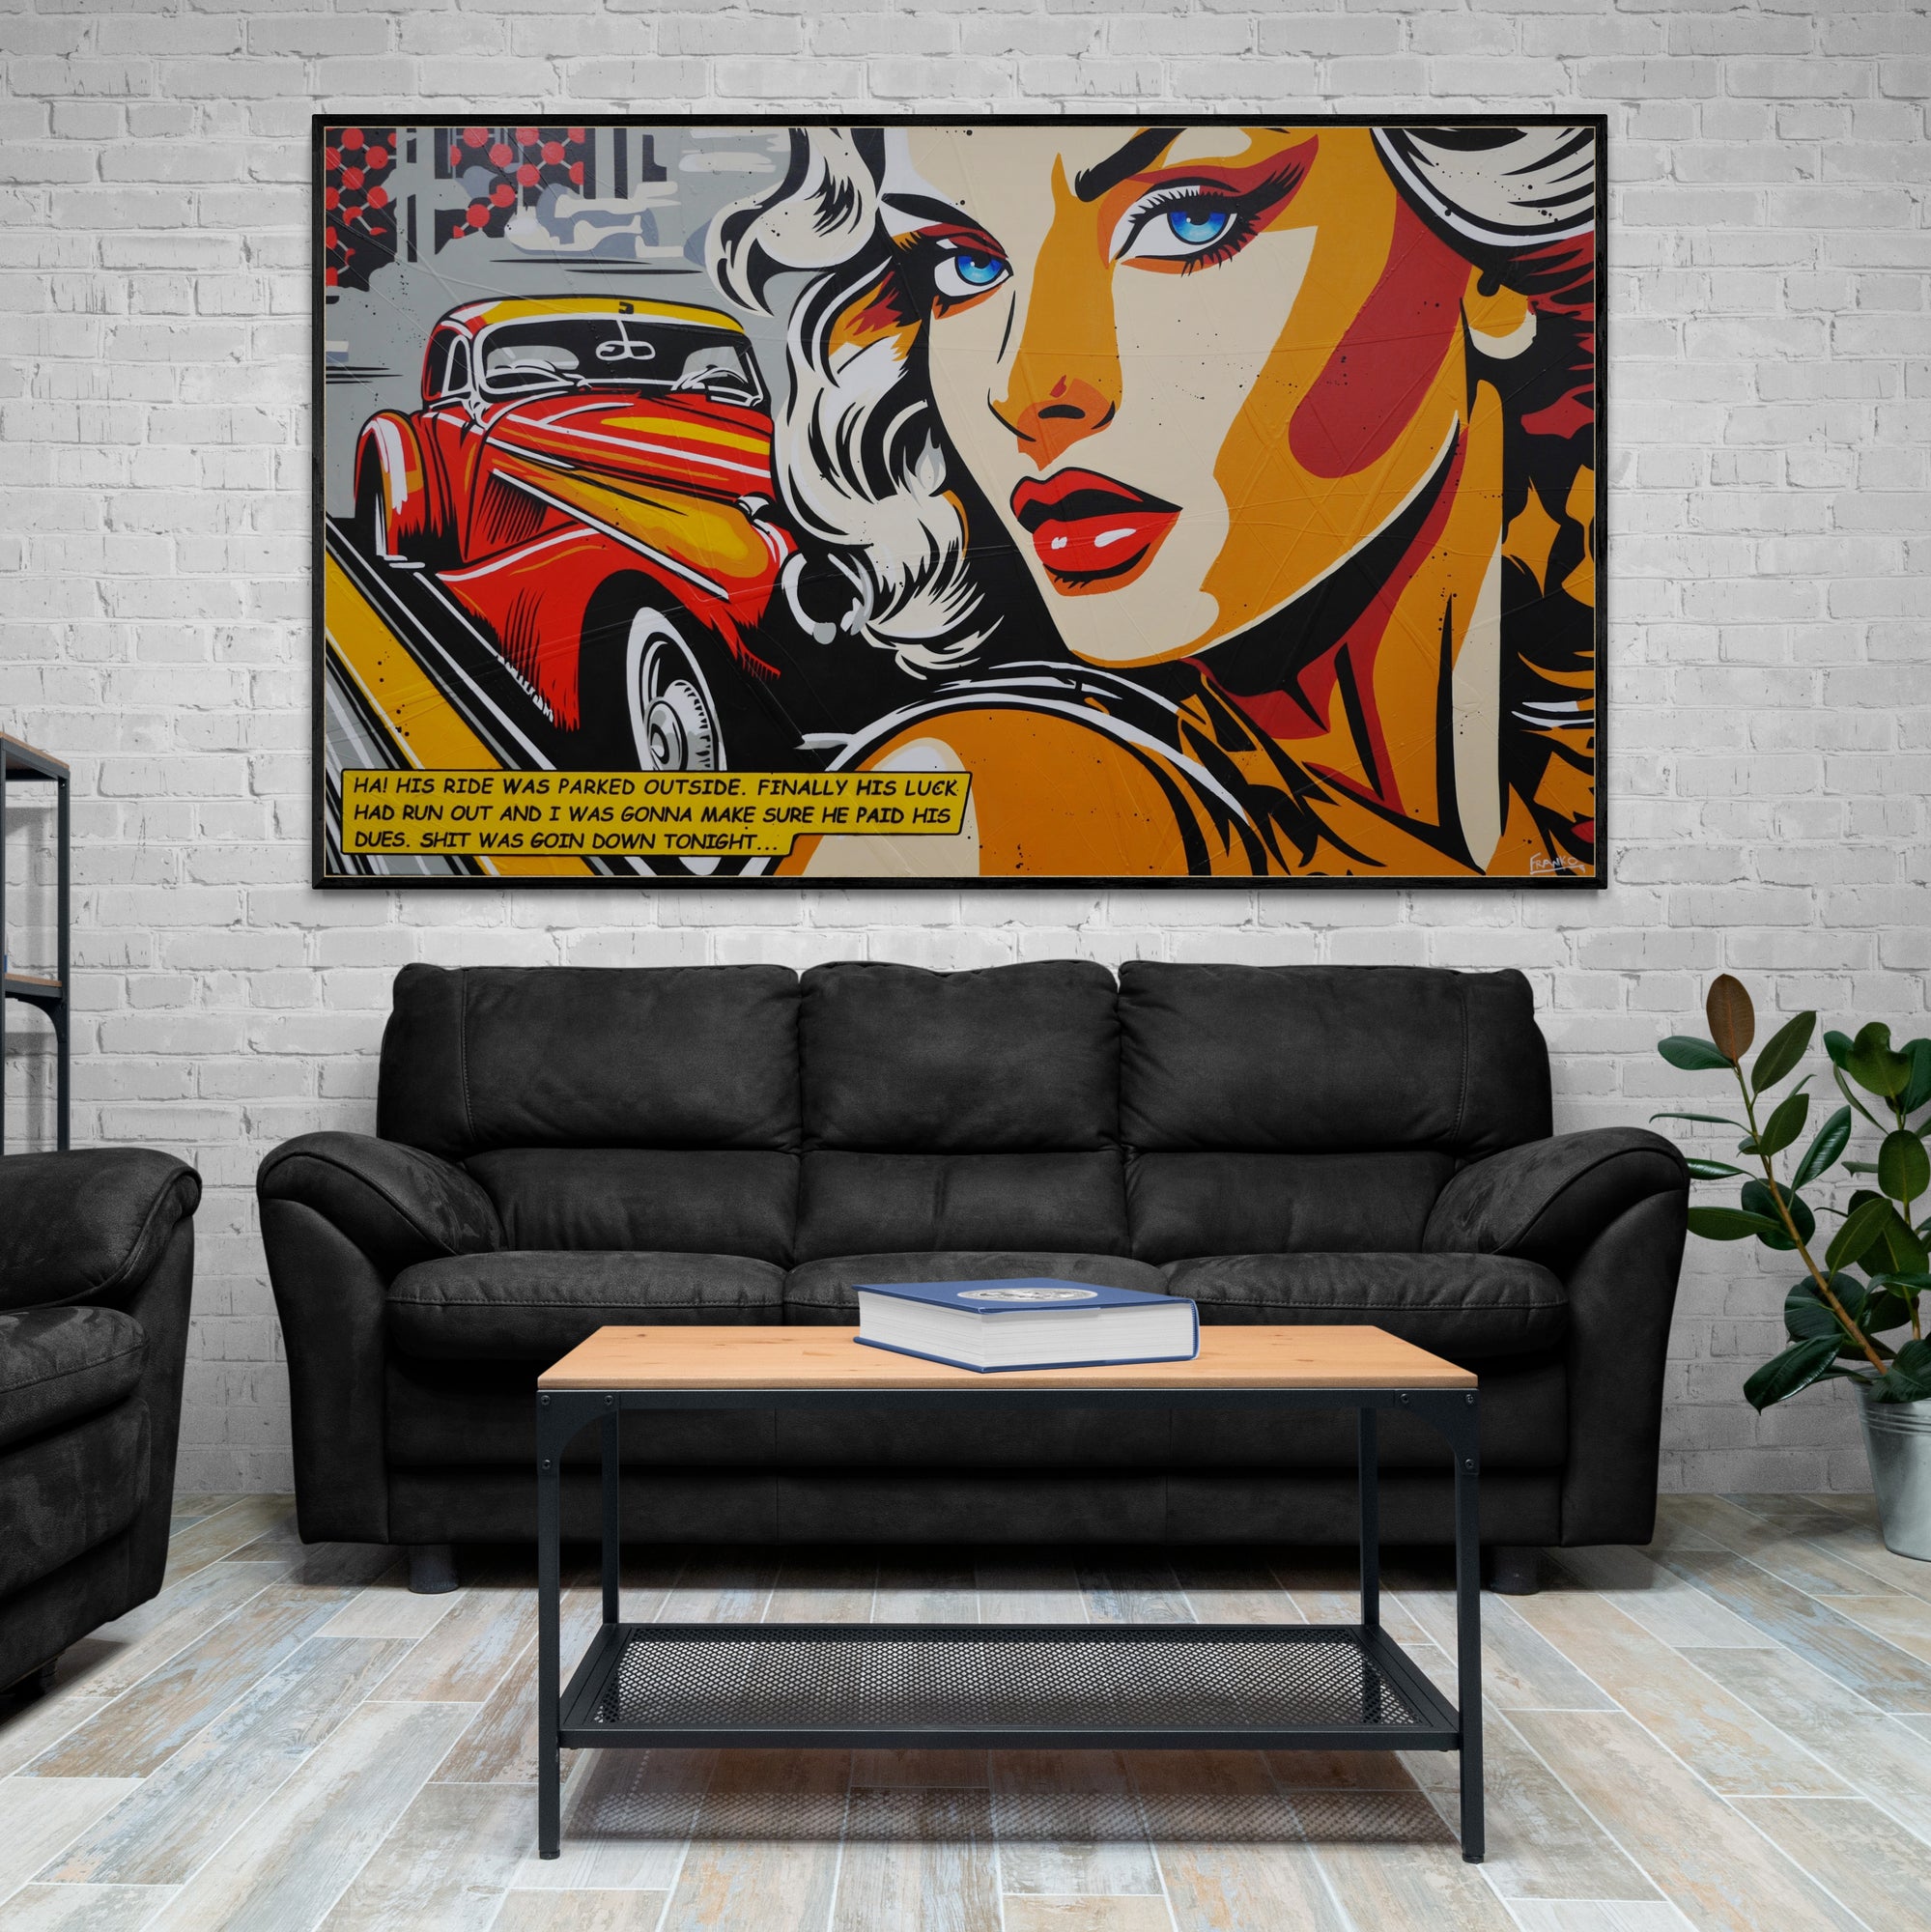 All About the Luck 200cm x 120cm Textured Classic Pop Art Painting (SOLD)